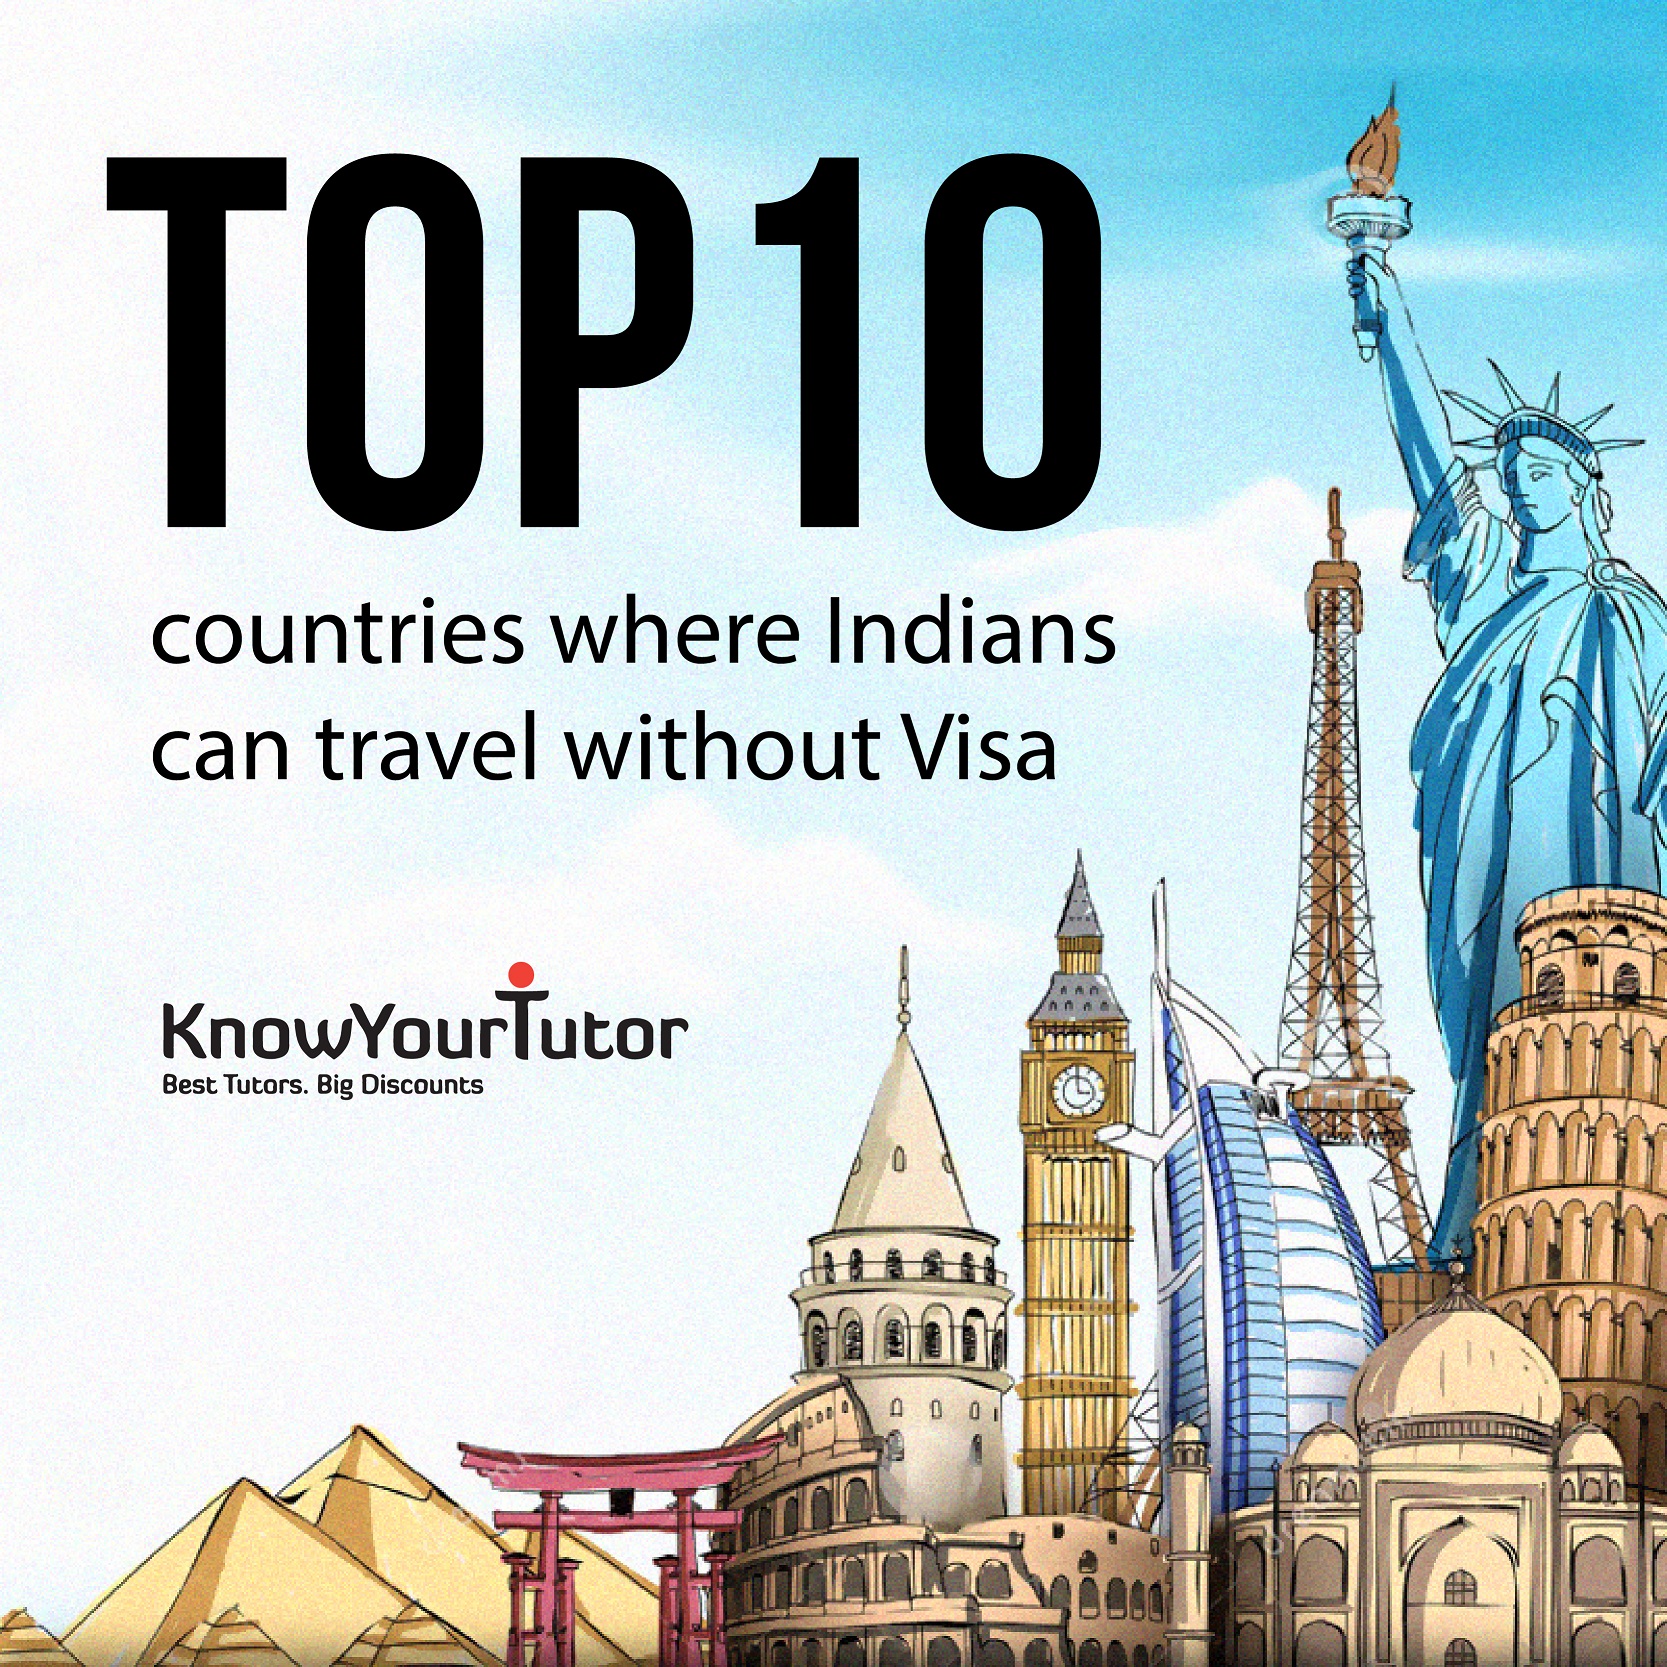 Top 10 countries where Indians can travel without Visa